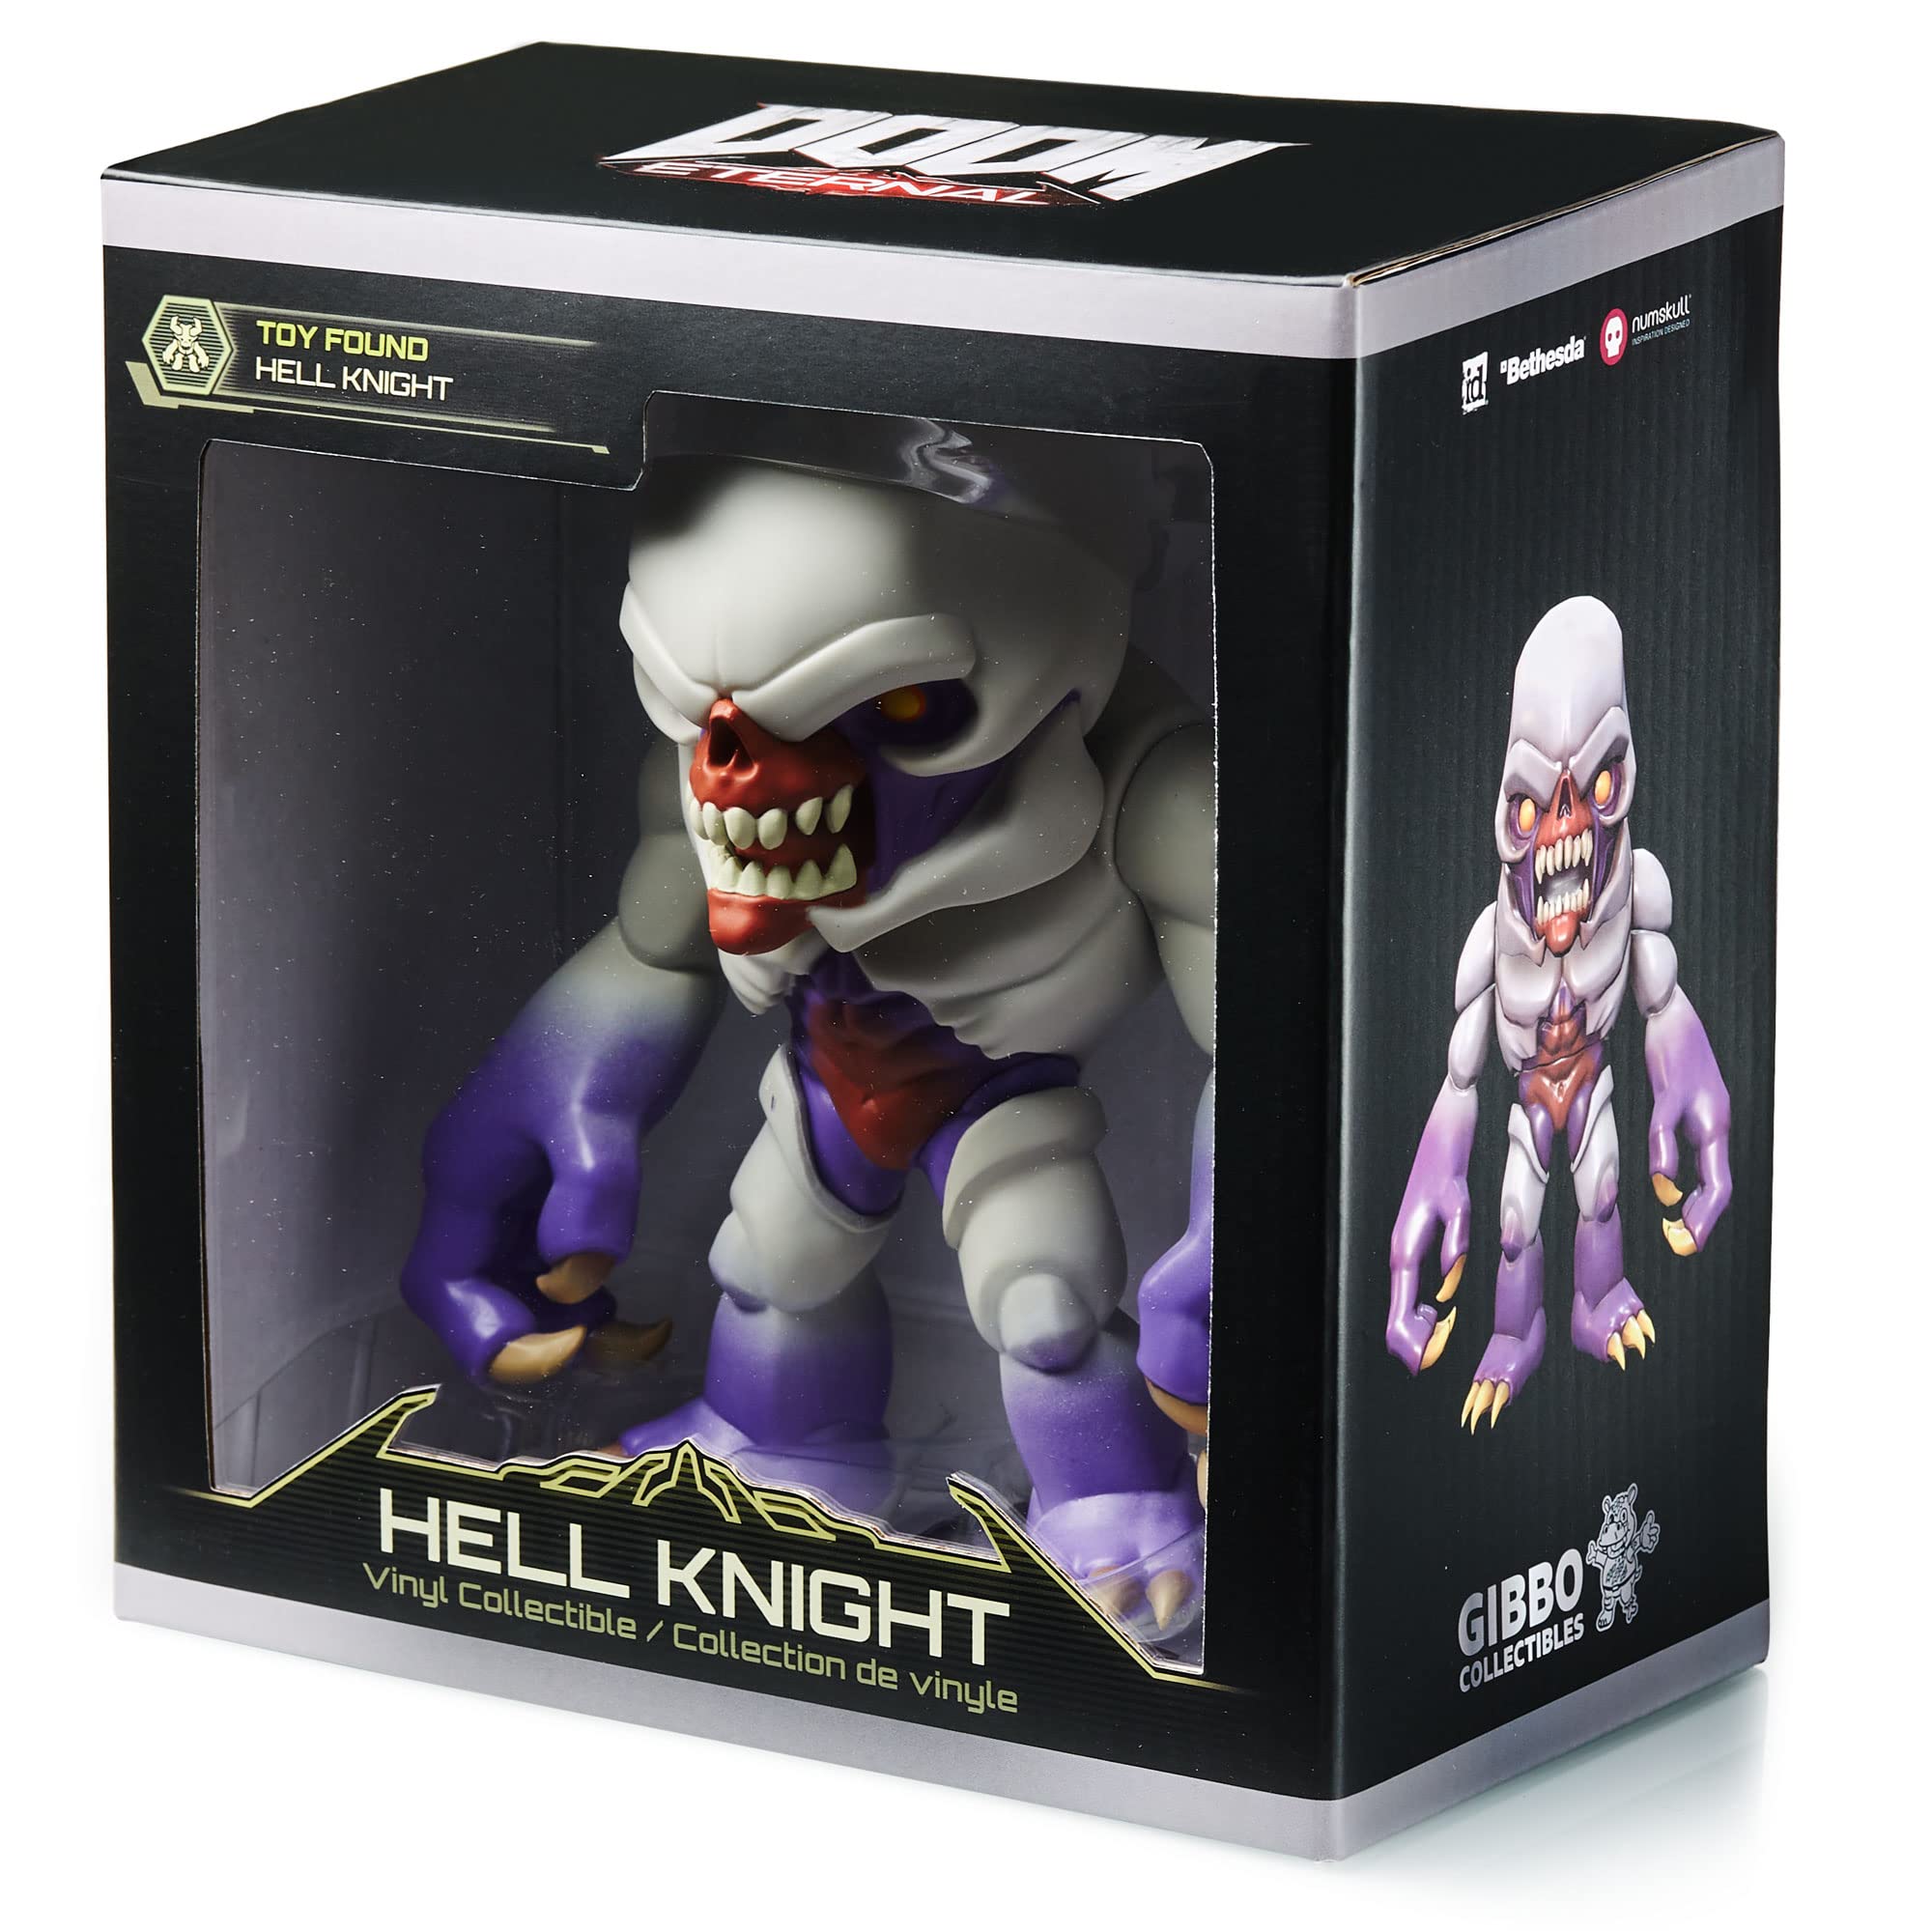 Numskull Hell Knight Doom Eternal in-Game Collectible Replica Posable Toy Figure - Official Doom Merchandise - Limited Edition